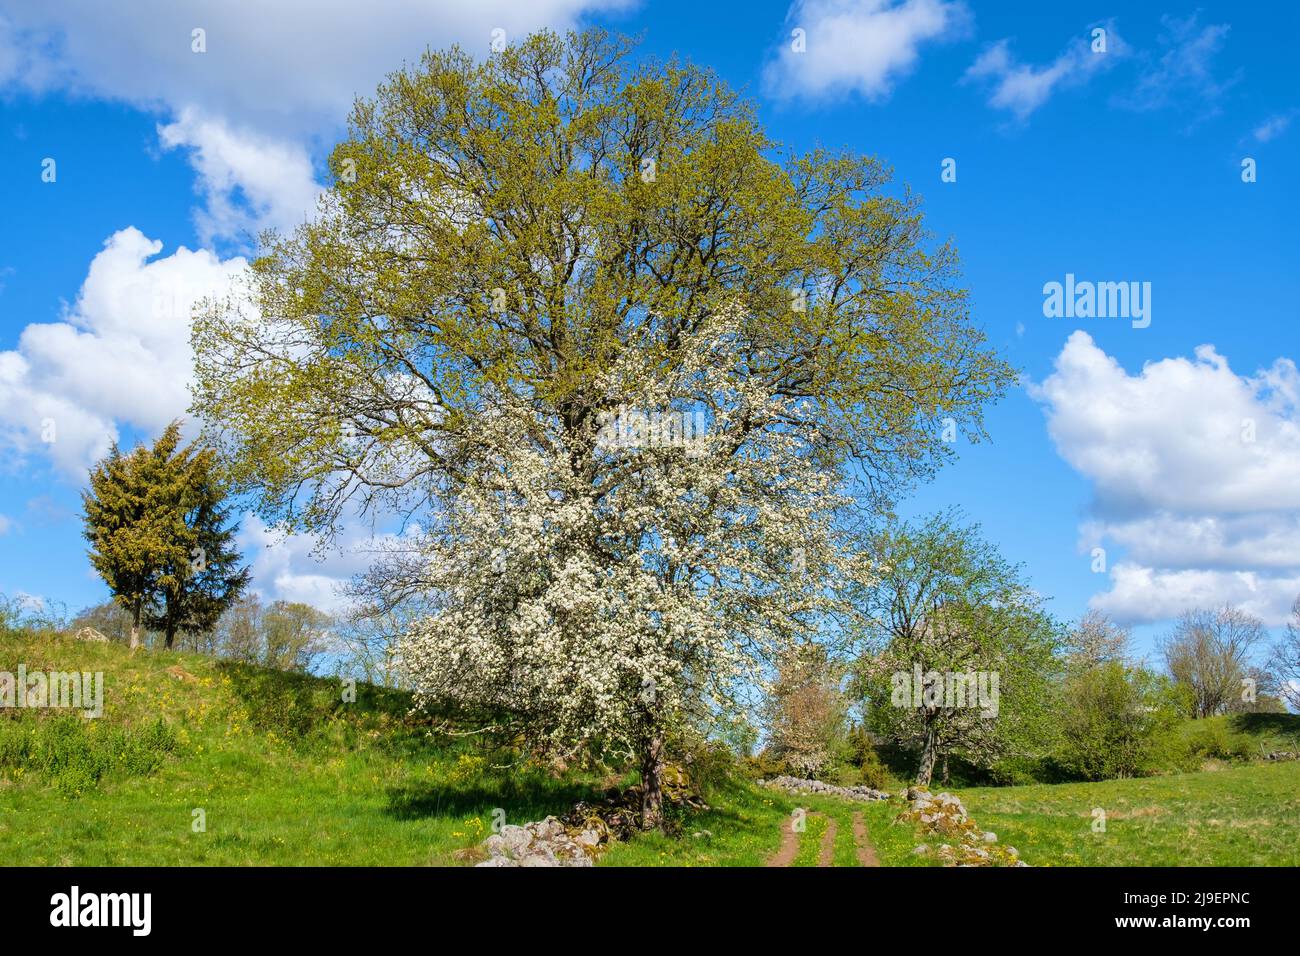 Rural landscape view with flowering trees in the spring Stock Photo